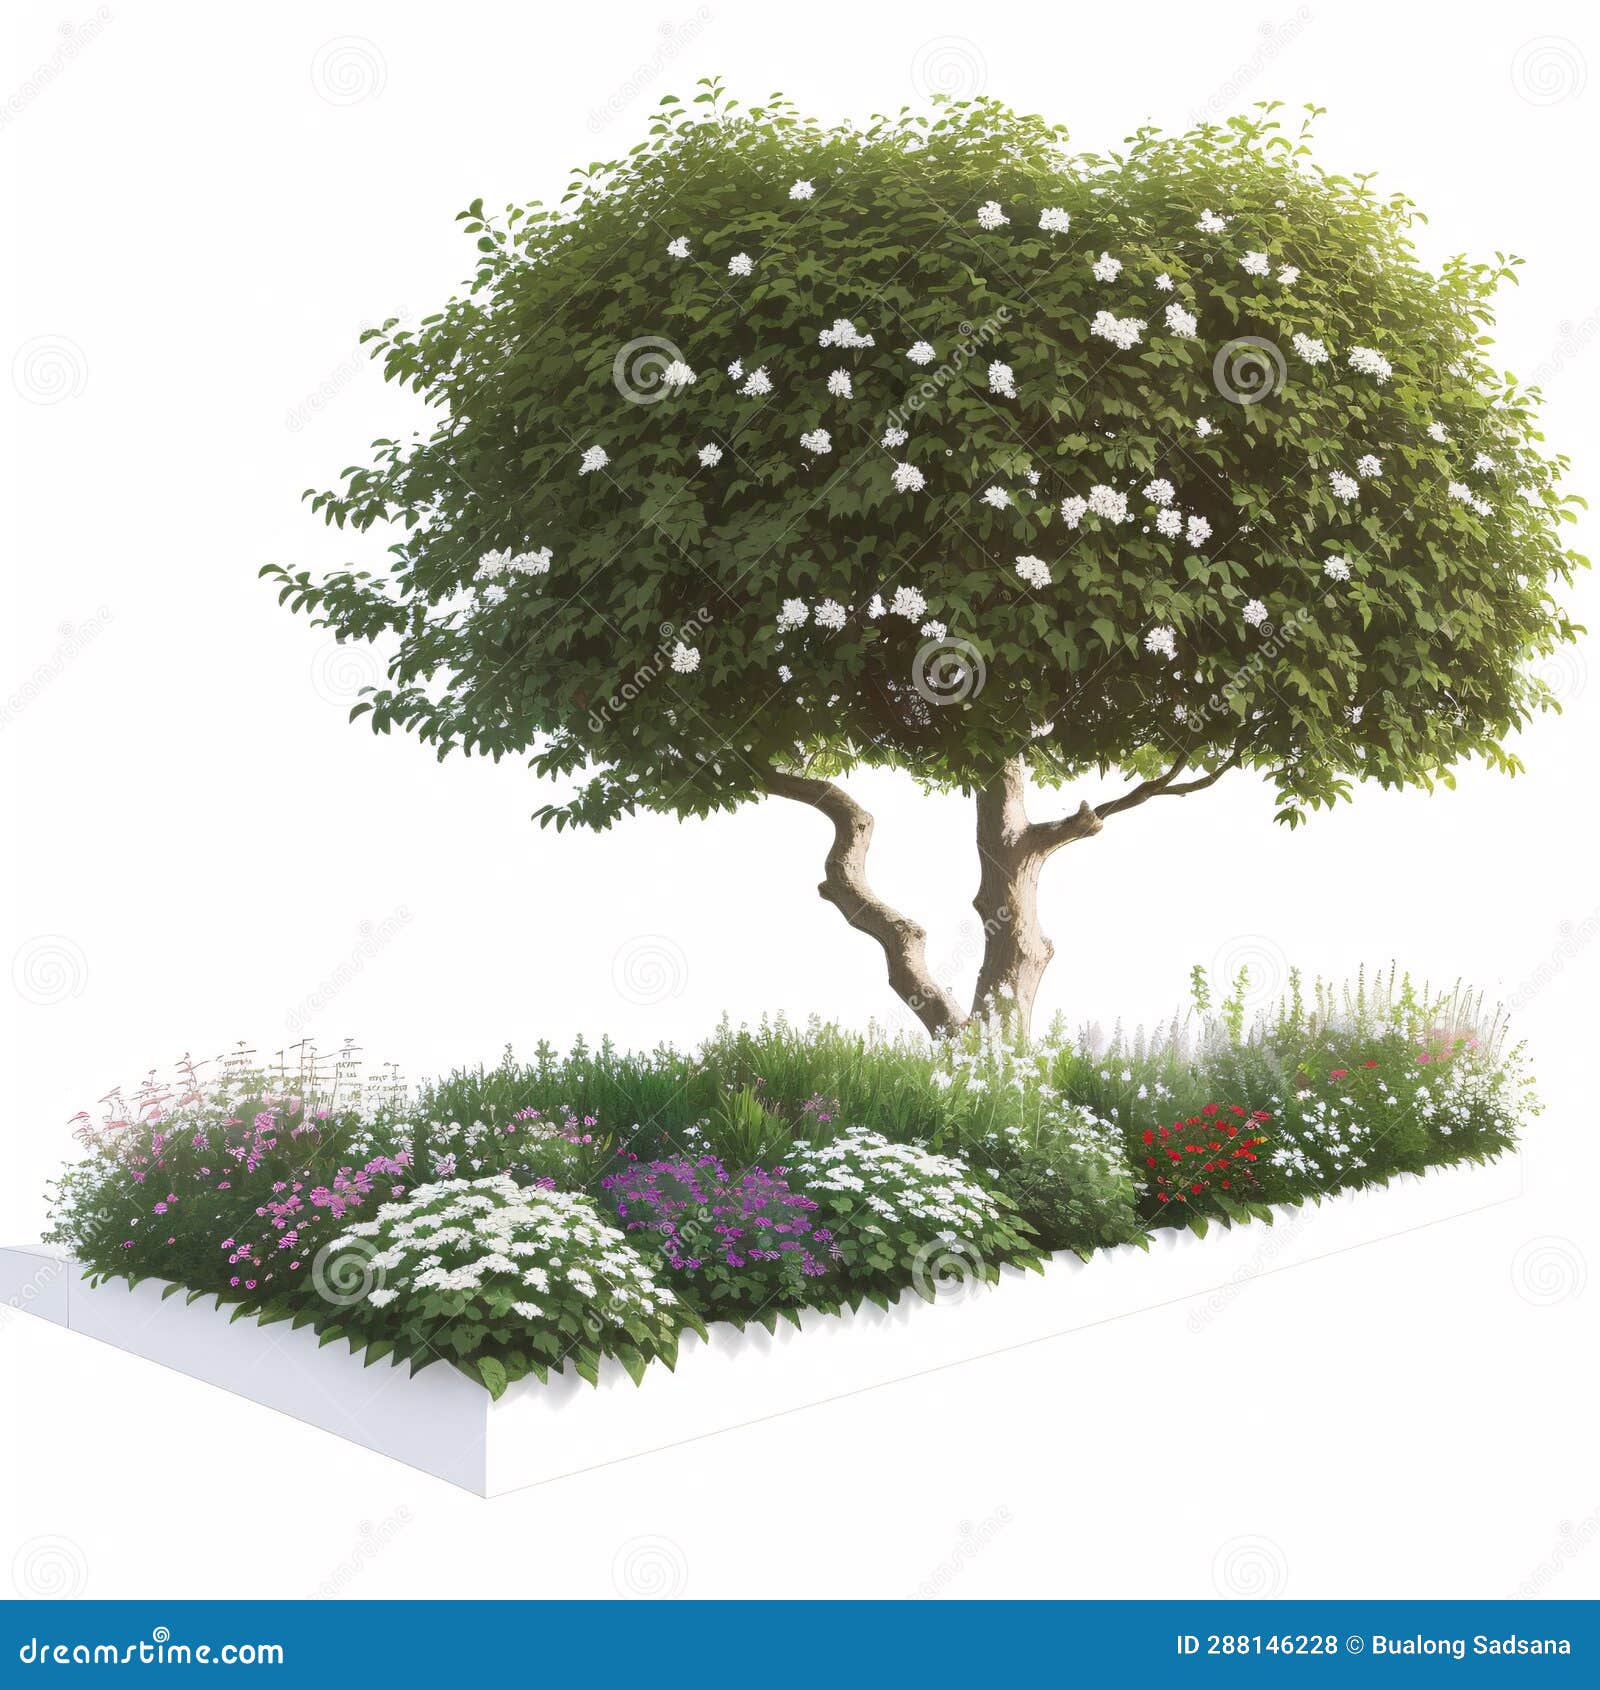 tree side view for landscape and architecture drawing, s for environment and garden, and painting bota